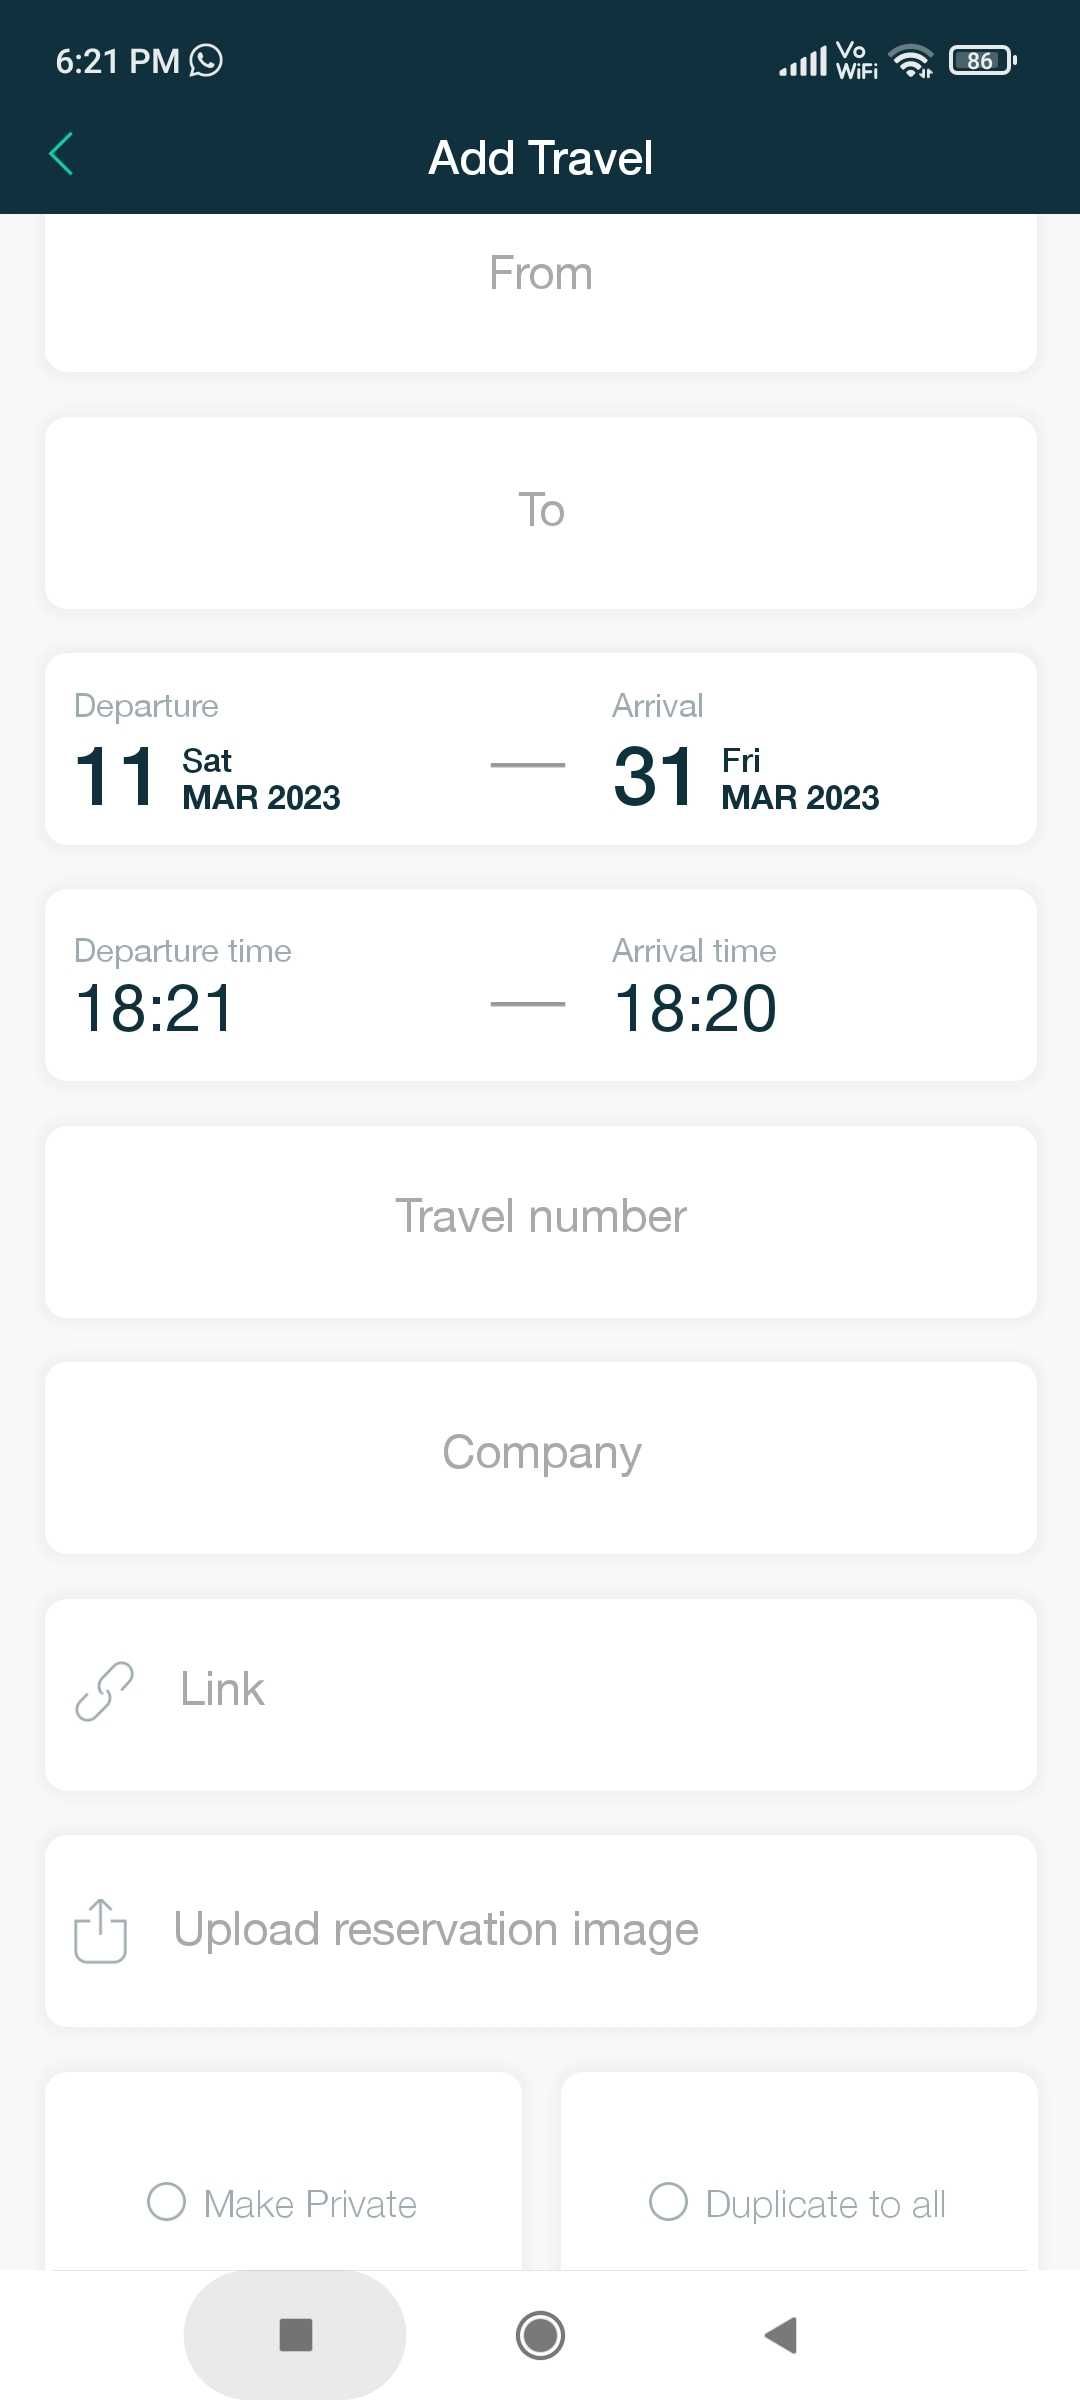 You can add different details for each type of activity, such as flight number and ticket screenshots for travel